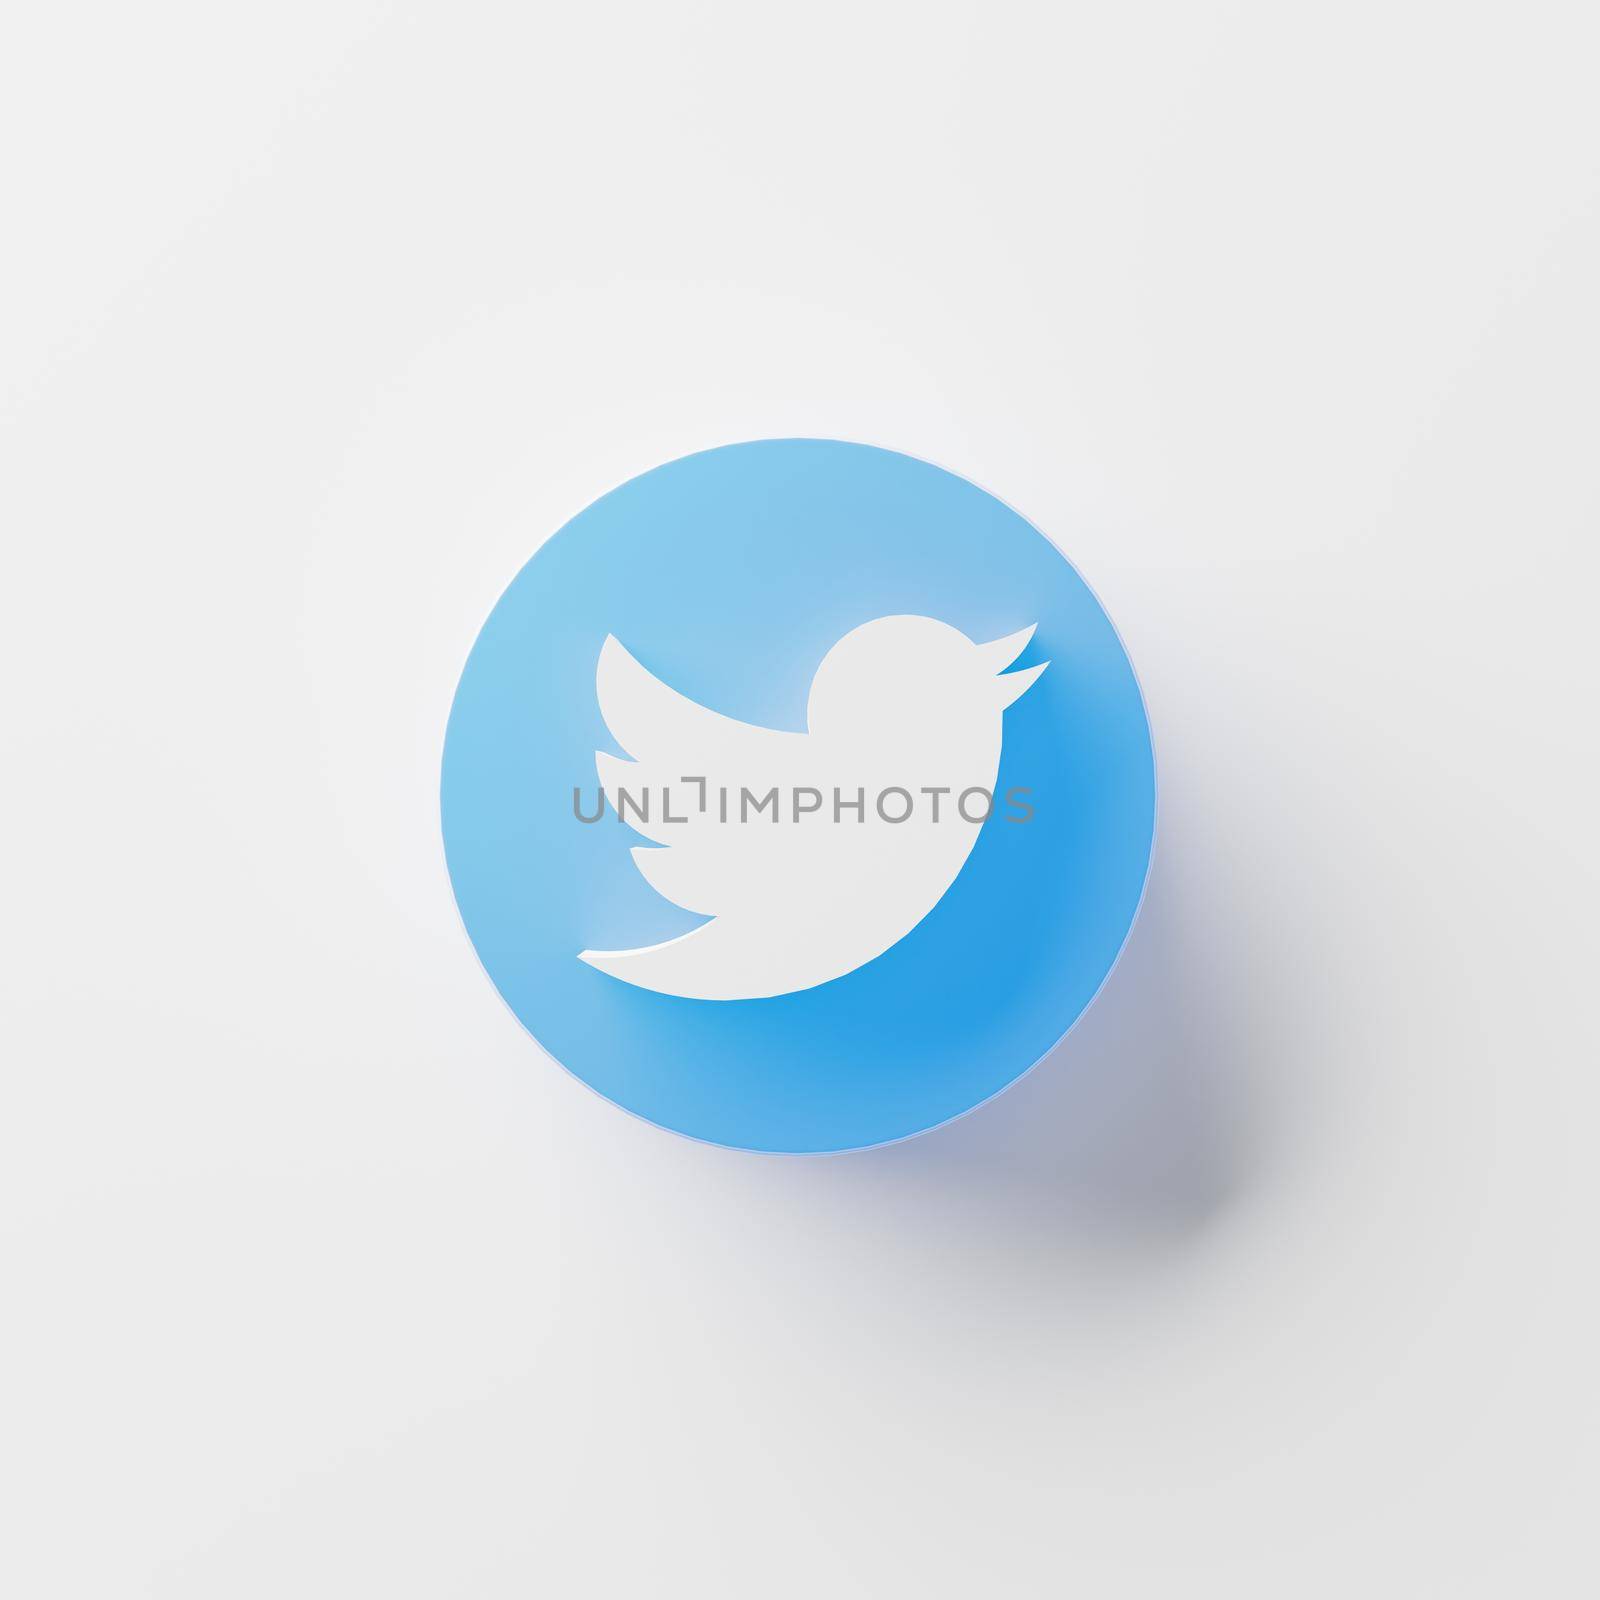 Chonburi, Thailand - Apr 15, 2021: A close up Twitter logo icon on isolated white background. Twitter is largest social media mobile app in the world, shallow depth of field. 3D illustration rendering